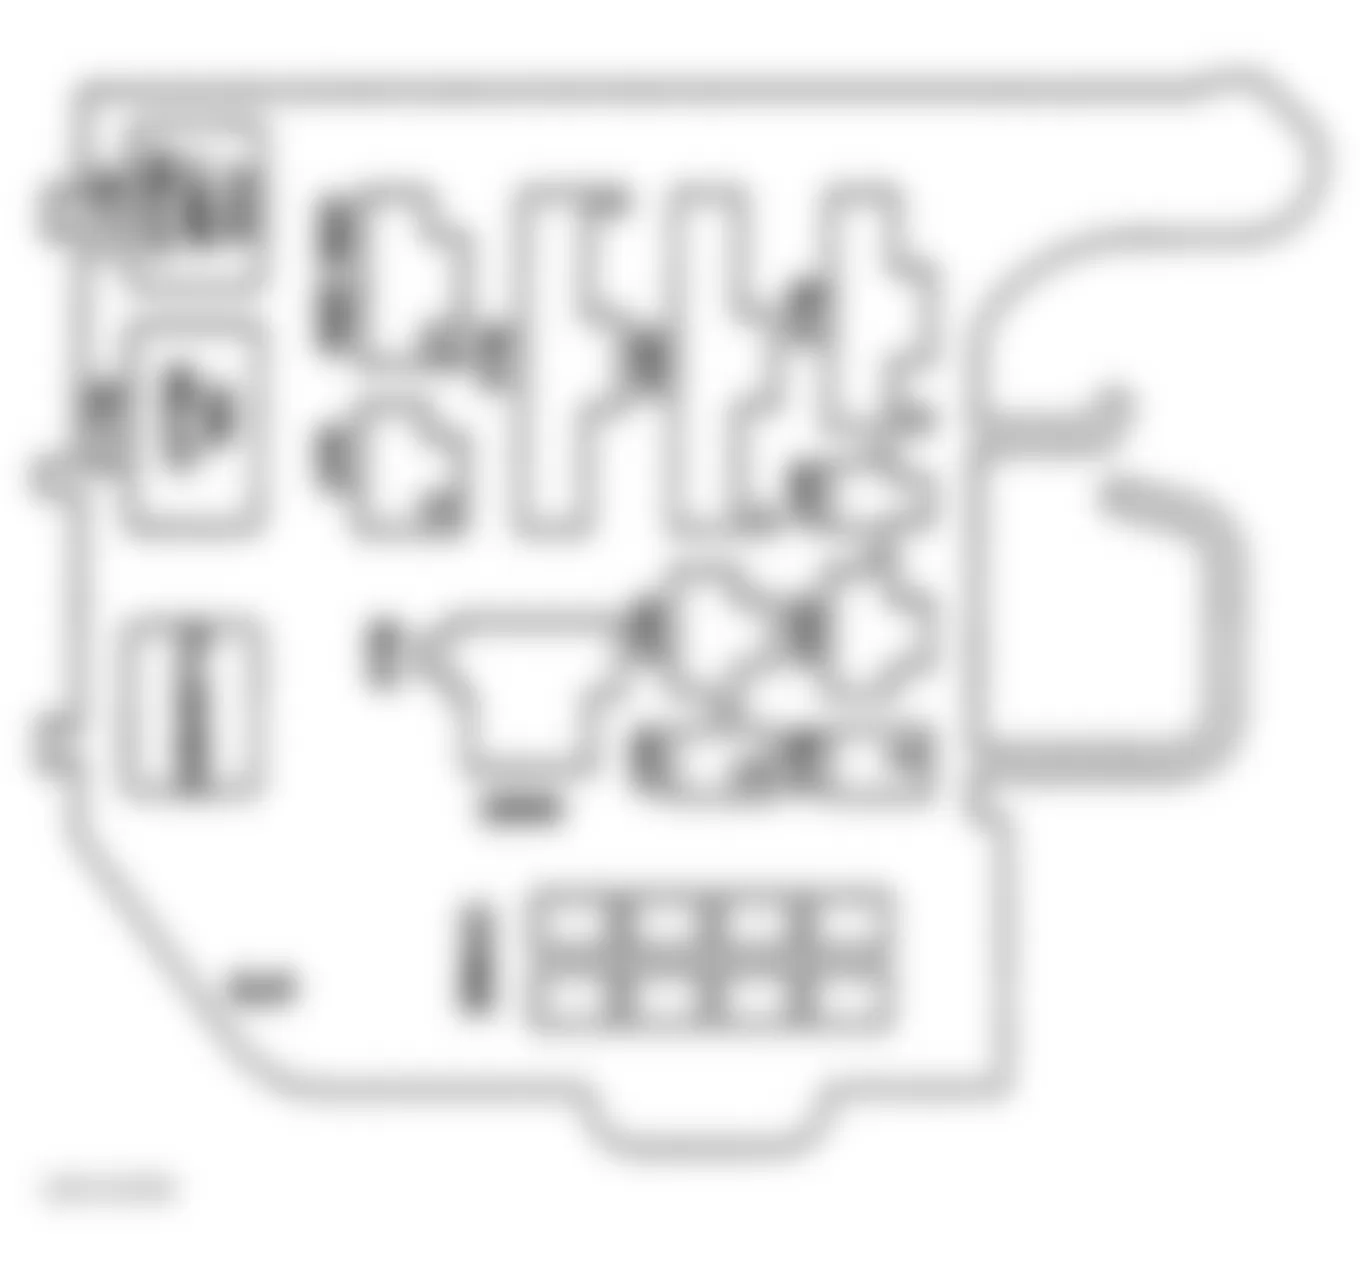 GMC Pickup K3500 1997 - Component Locations -  Identifying Convenience Center Components